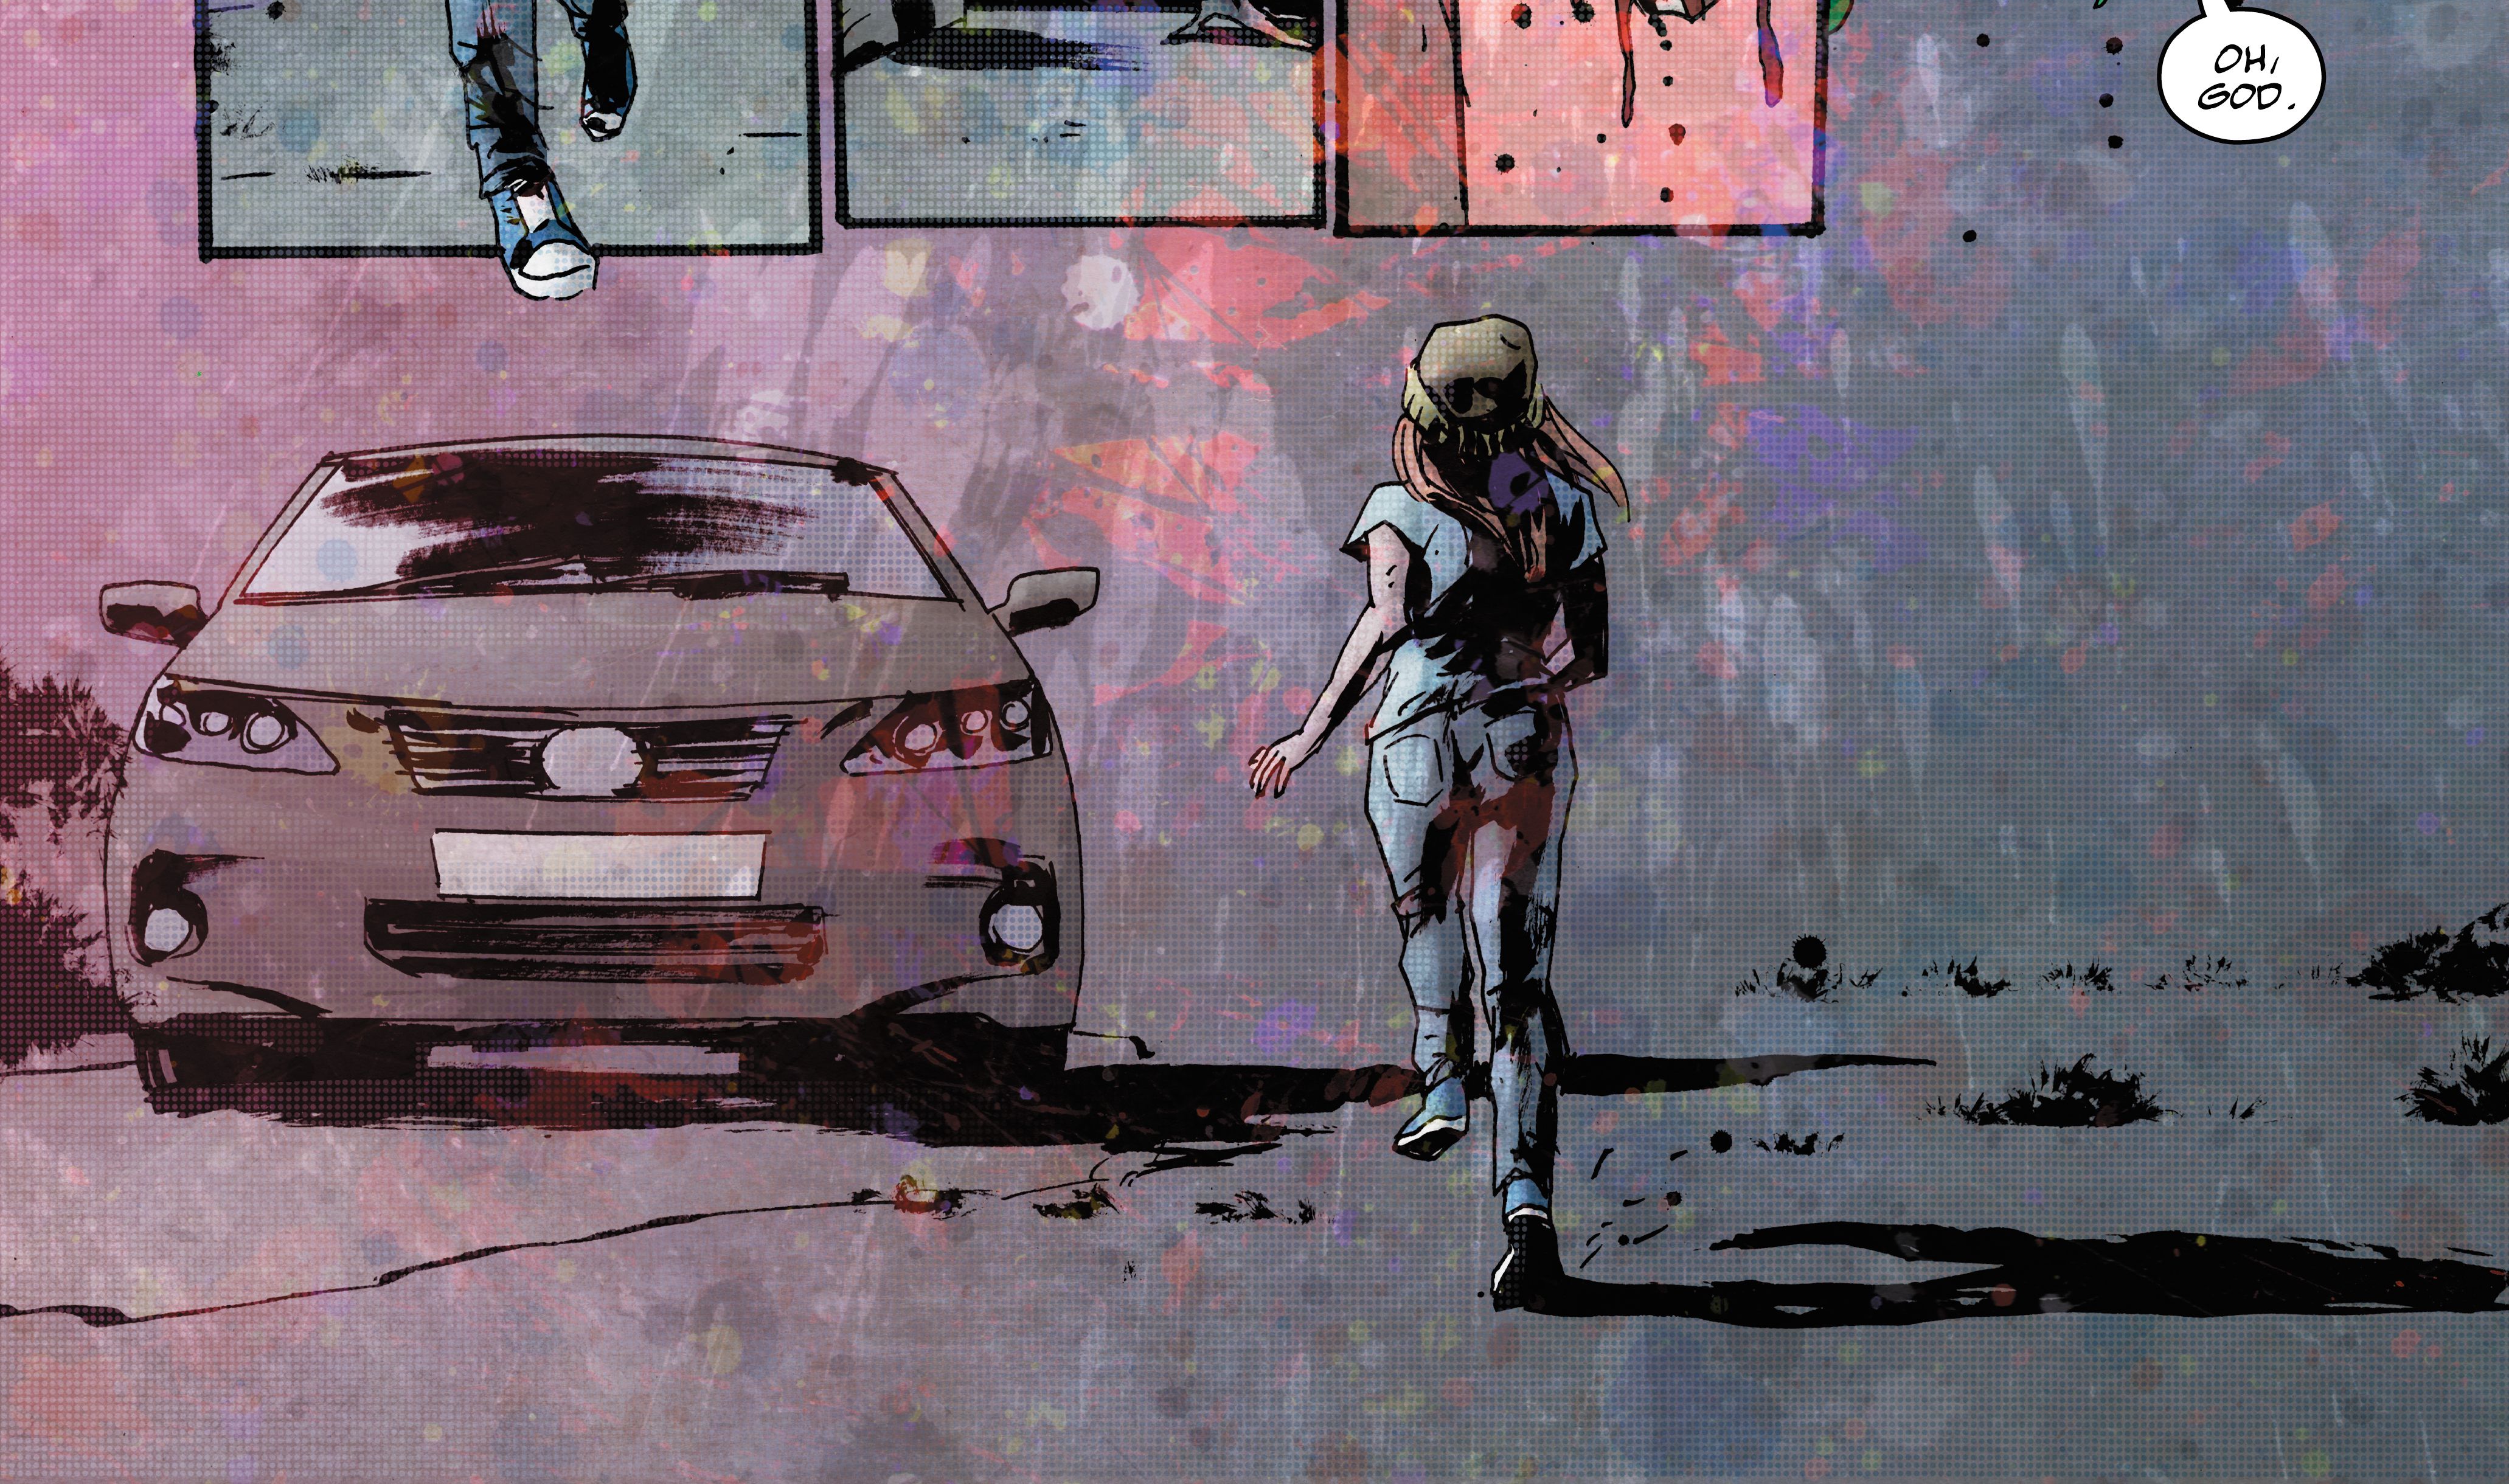 Wytches 5